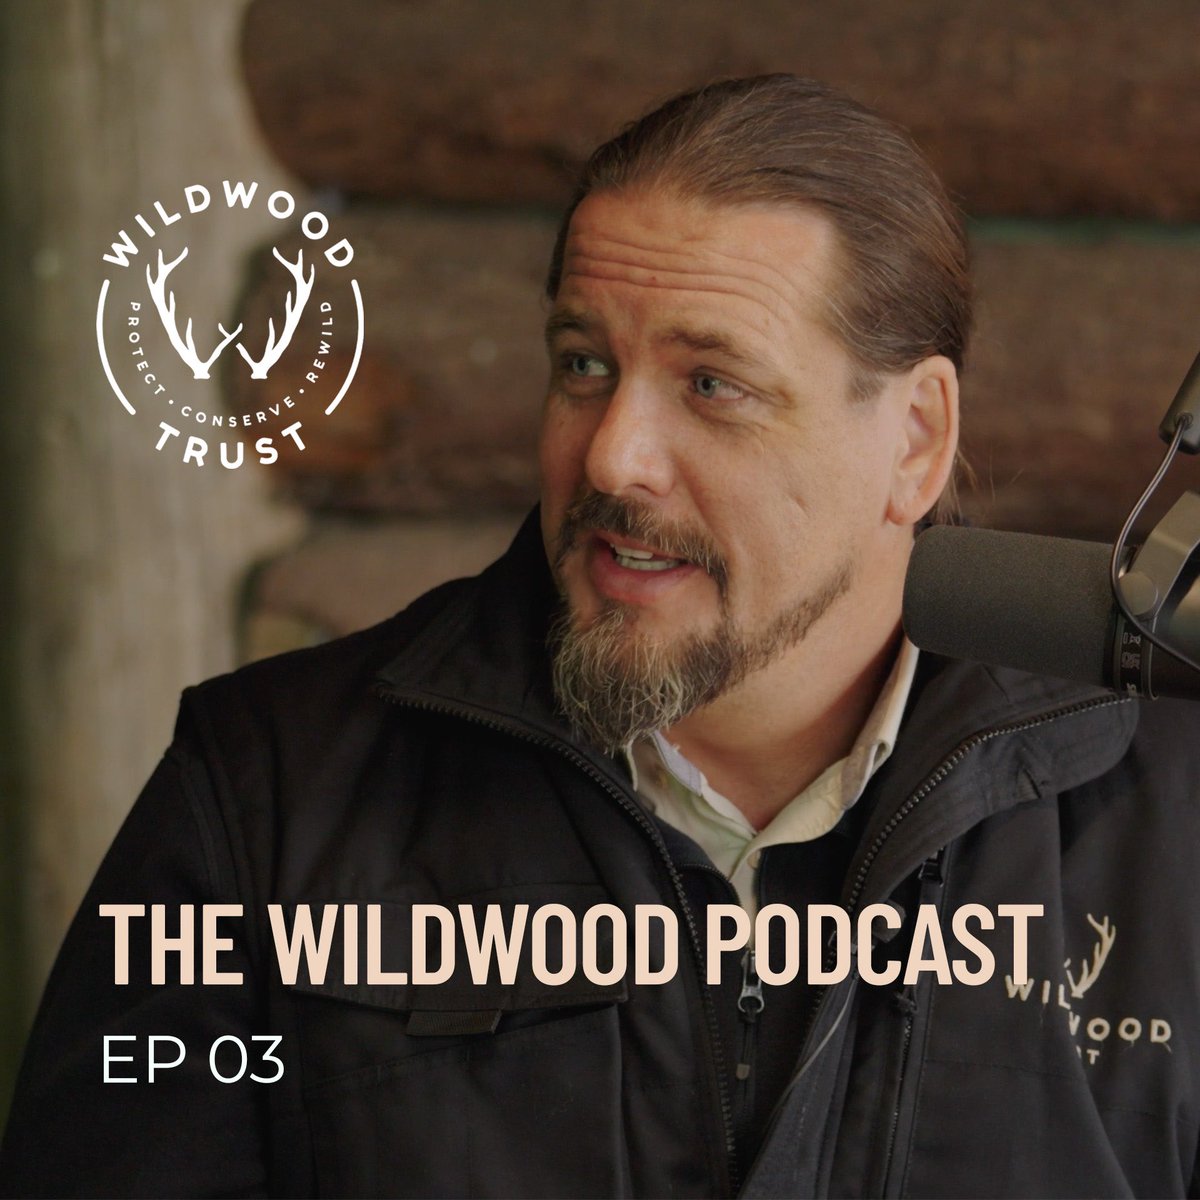 Episode 3 of The Wildwood Podcast is now live! We sit down with Paul Whitfield, Director General of Wildwood Trust, to explore his journey into the world of Wildwood and the impactful strides made in the last few years. youtube.com/watch?v=fedx1X… #wildwoodtrust #conservation